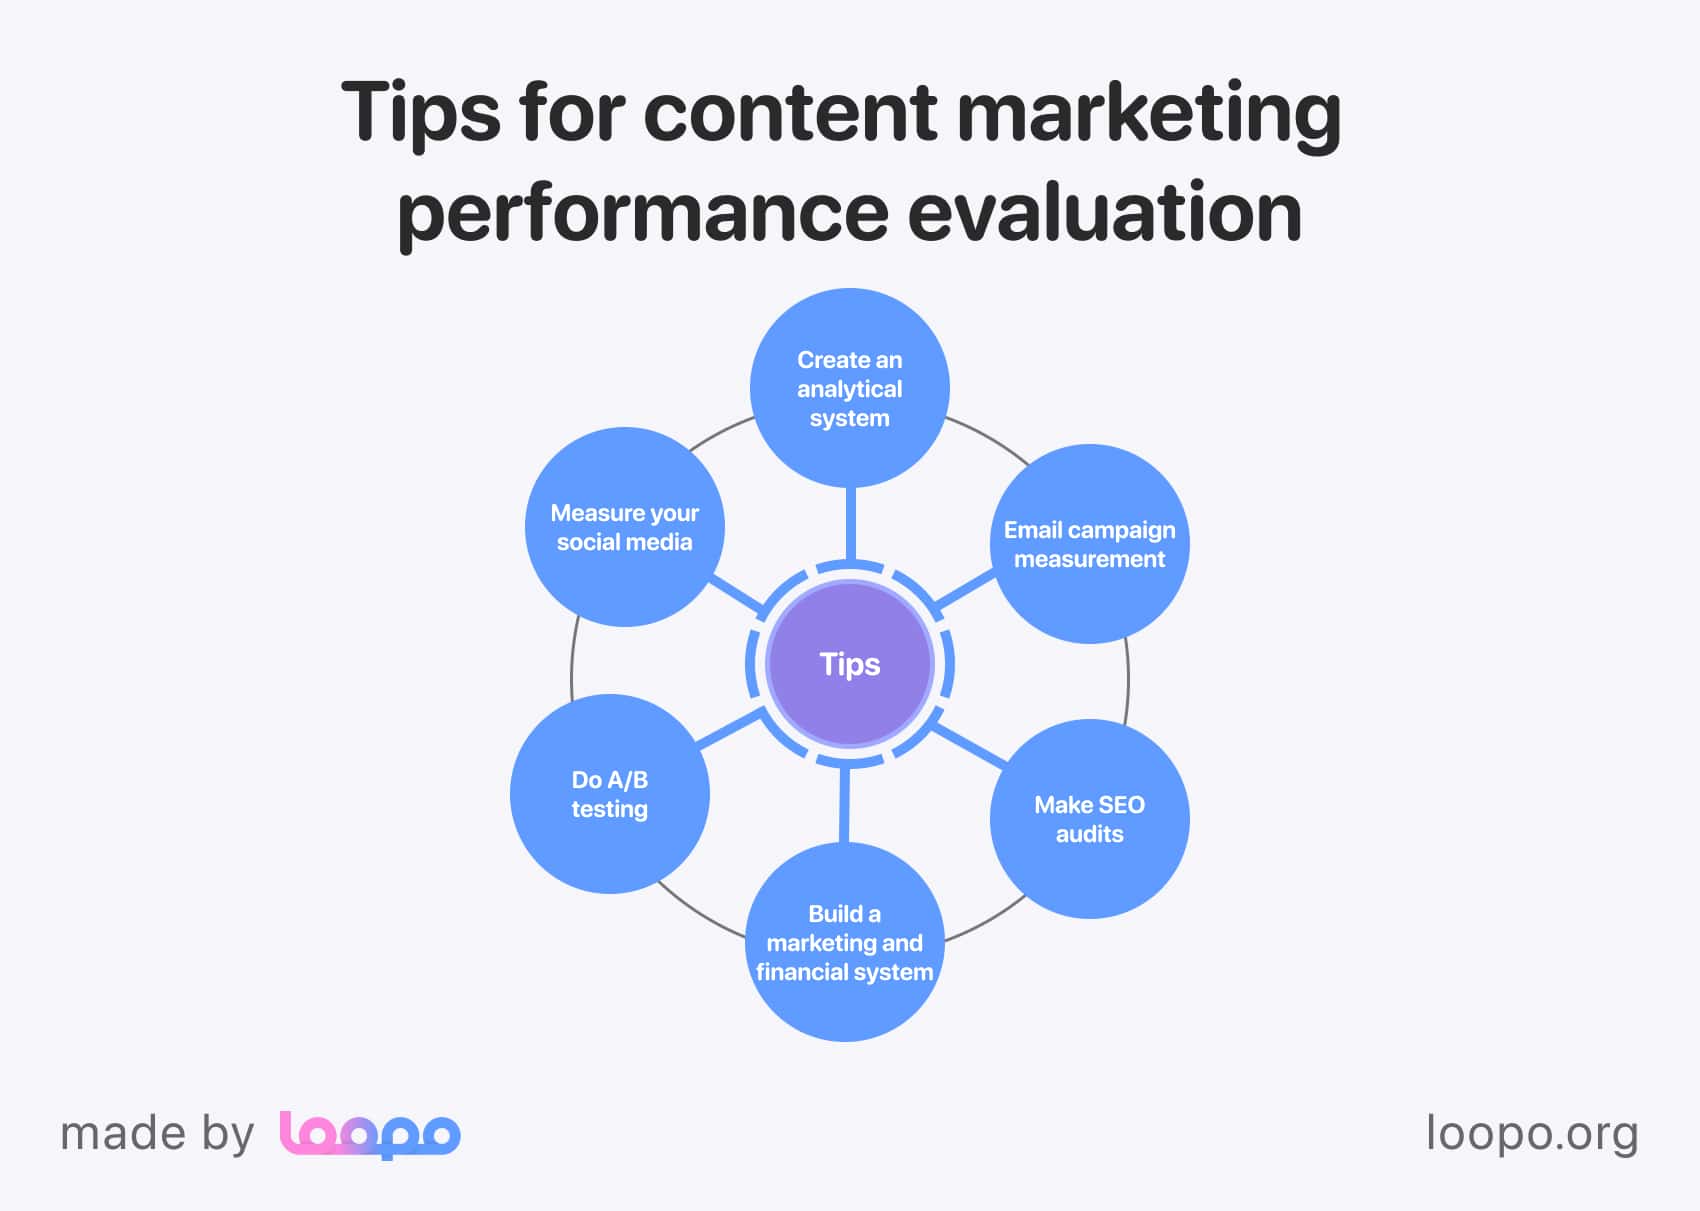 Major tips to analyze your content